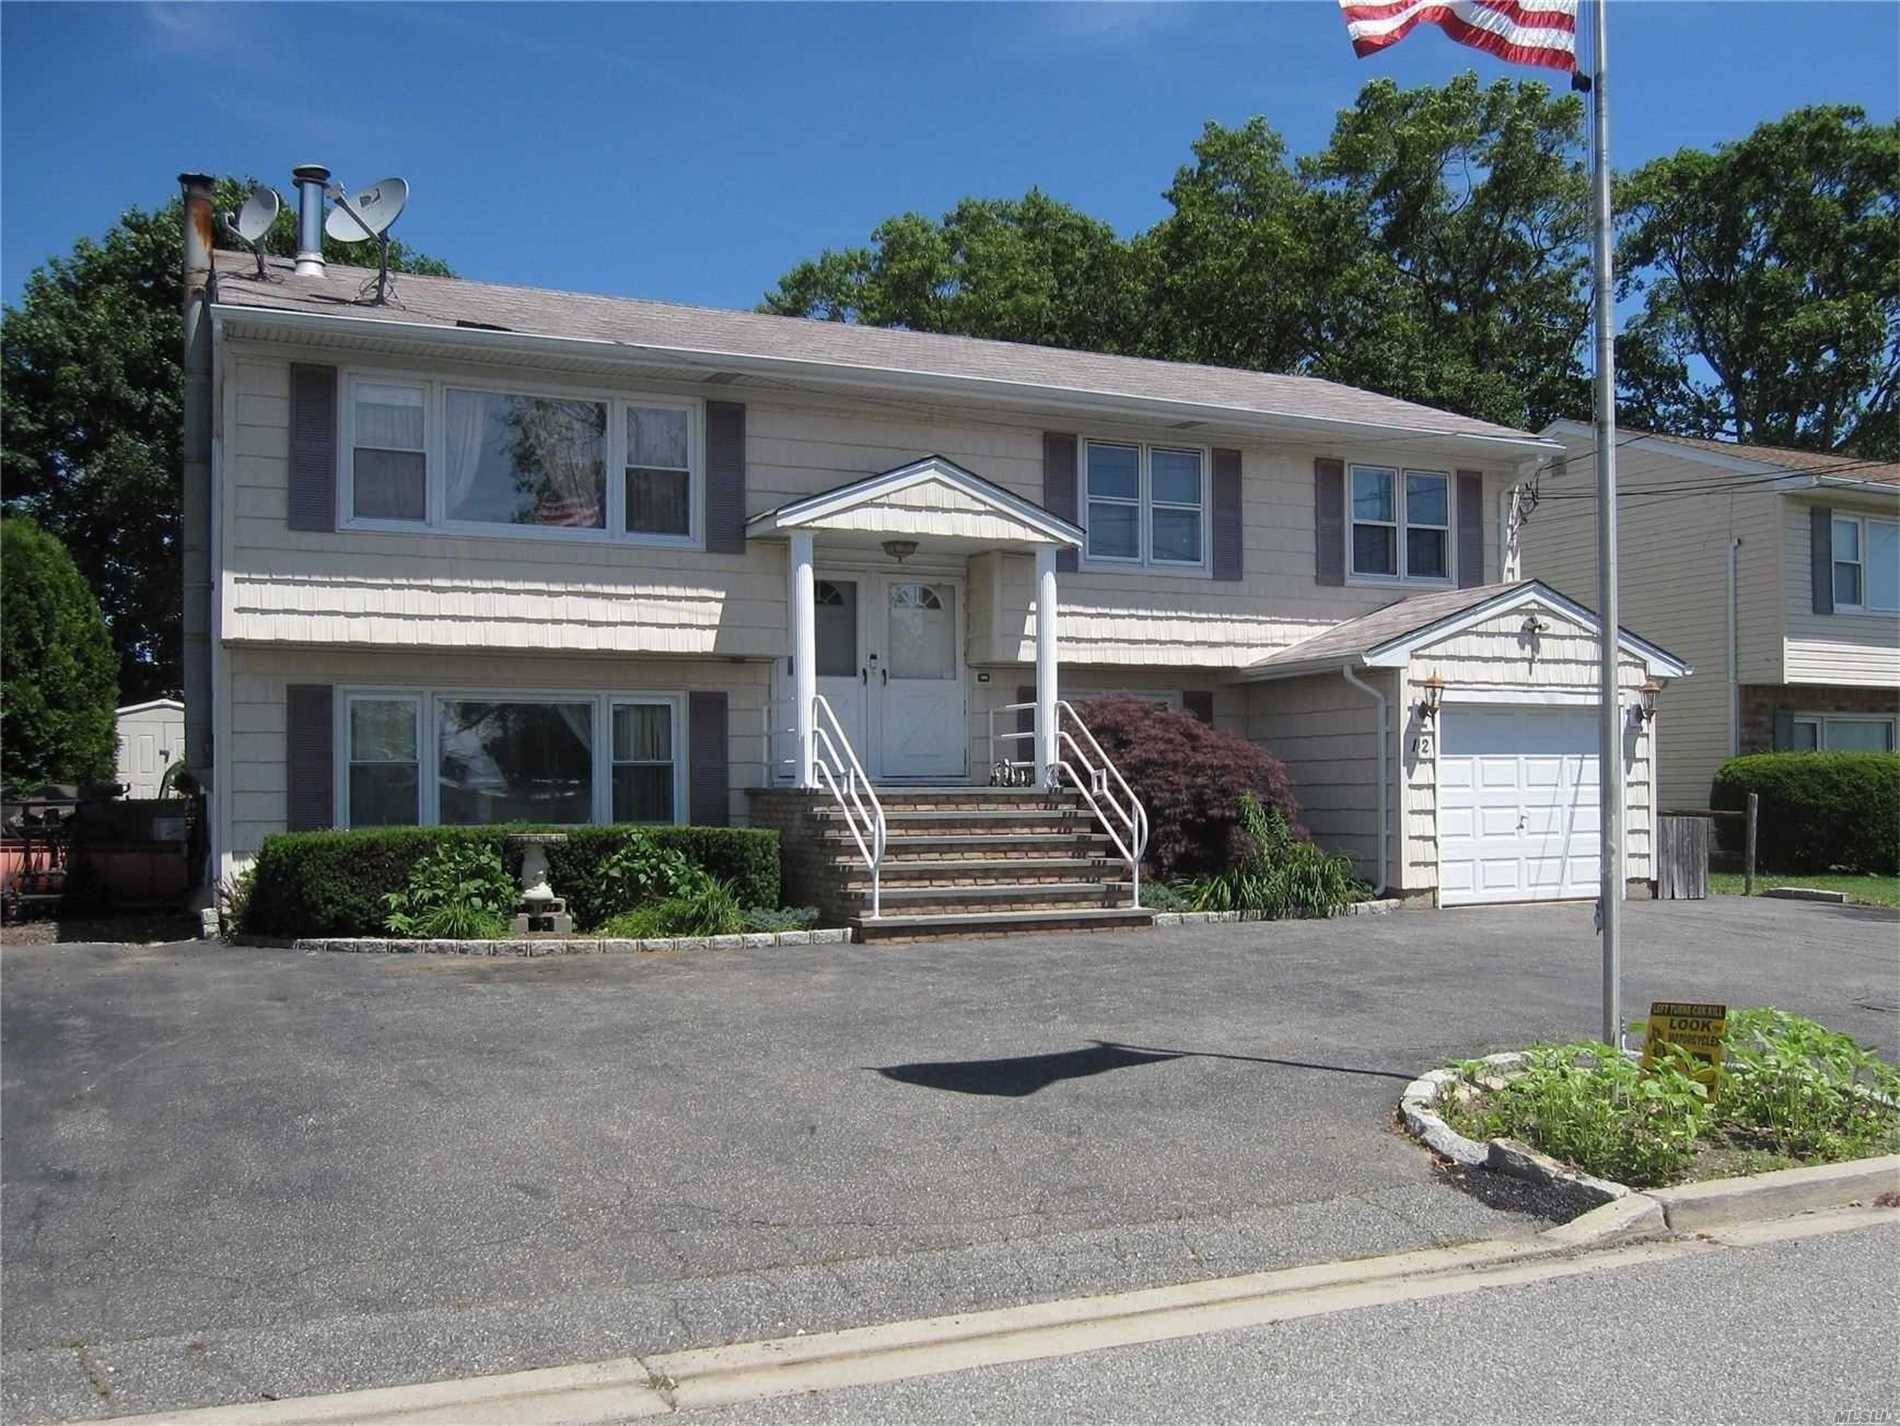 Colonial Style Duplex In North Syosset Featuring 5 Bedrooms And 2 Full Baths In Total.